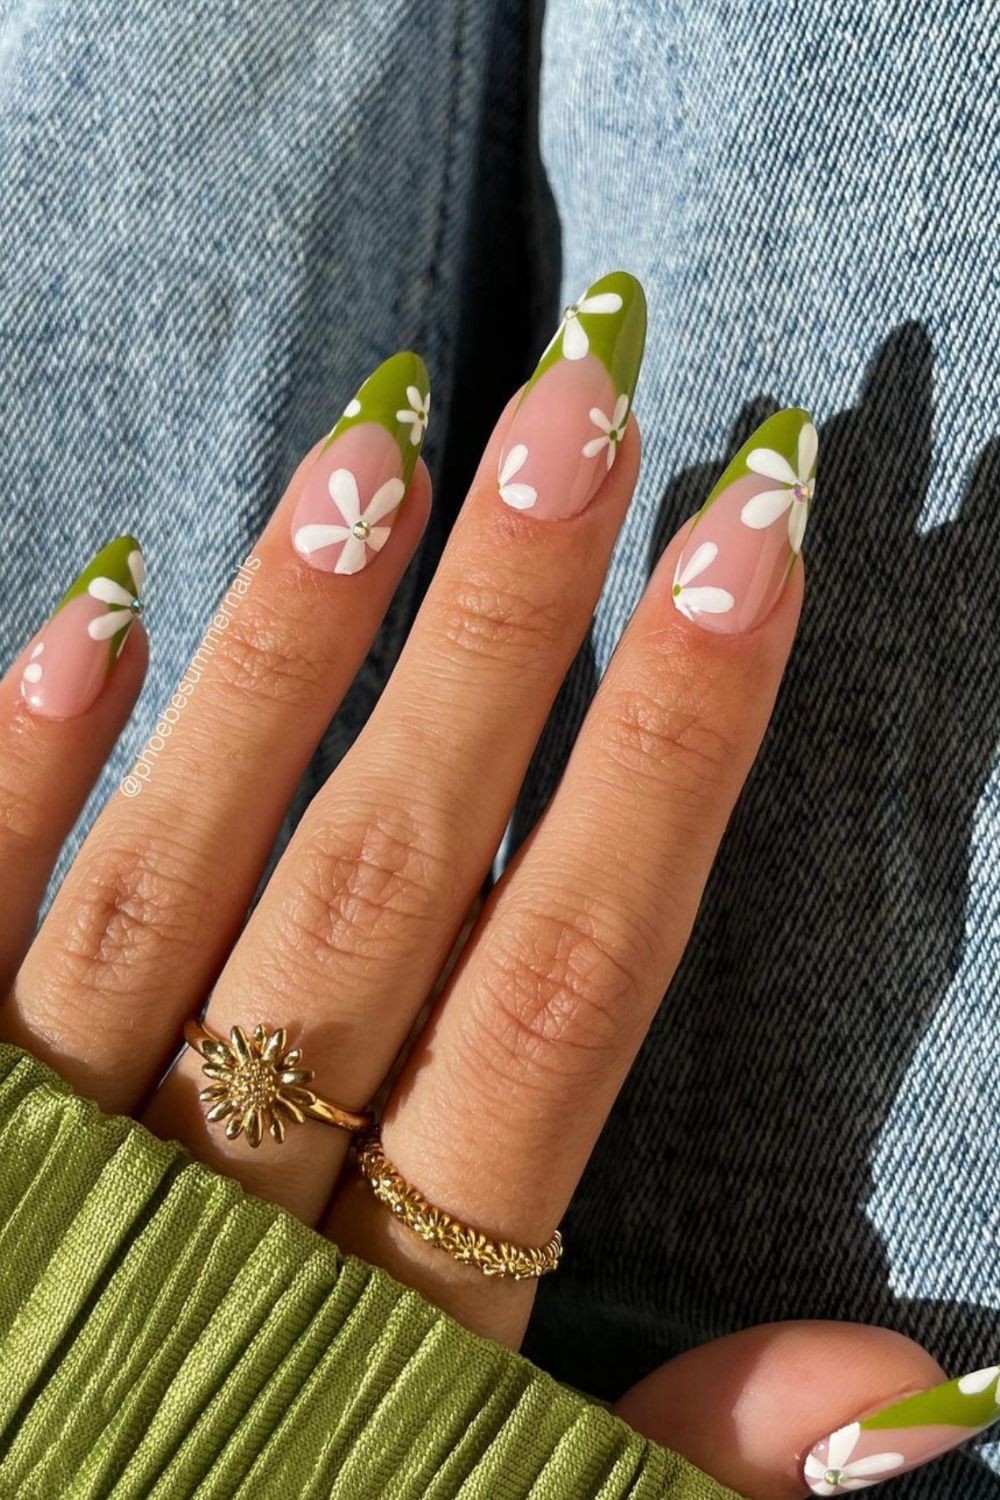 Grassy Green French Tips with White Flowers